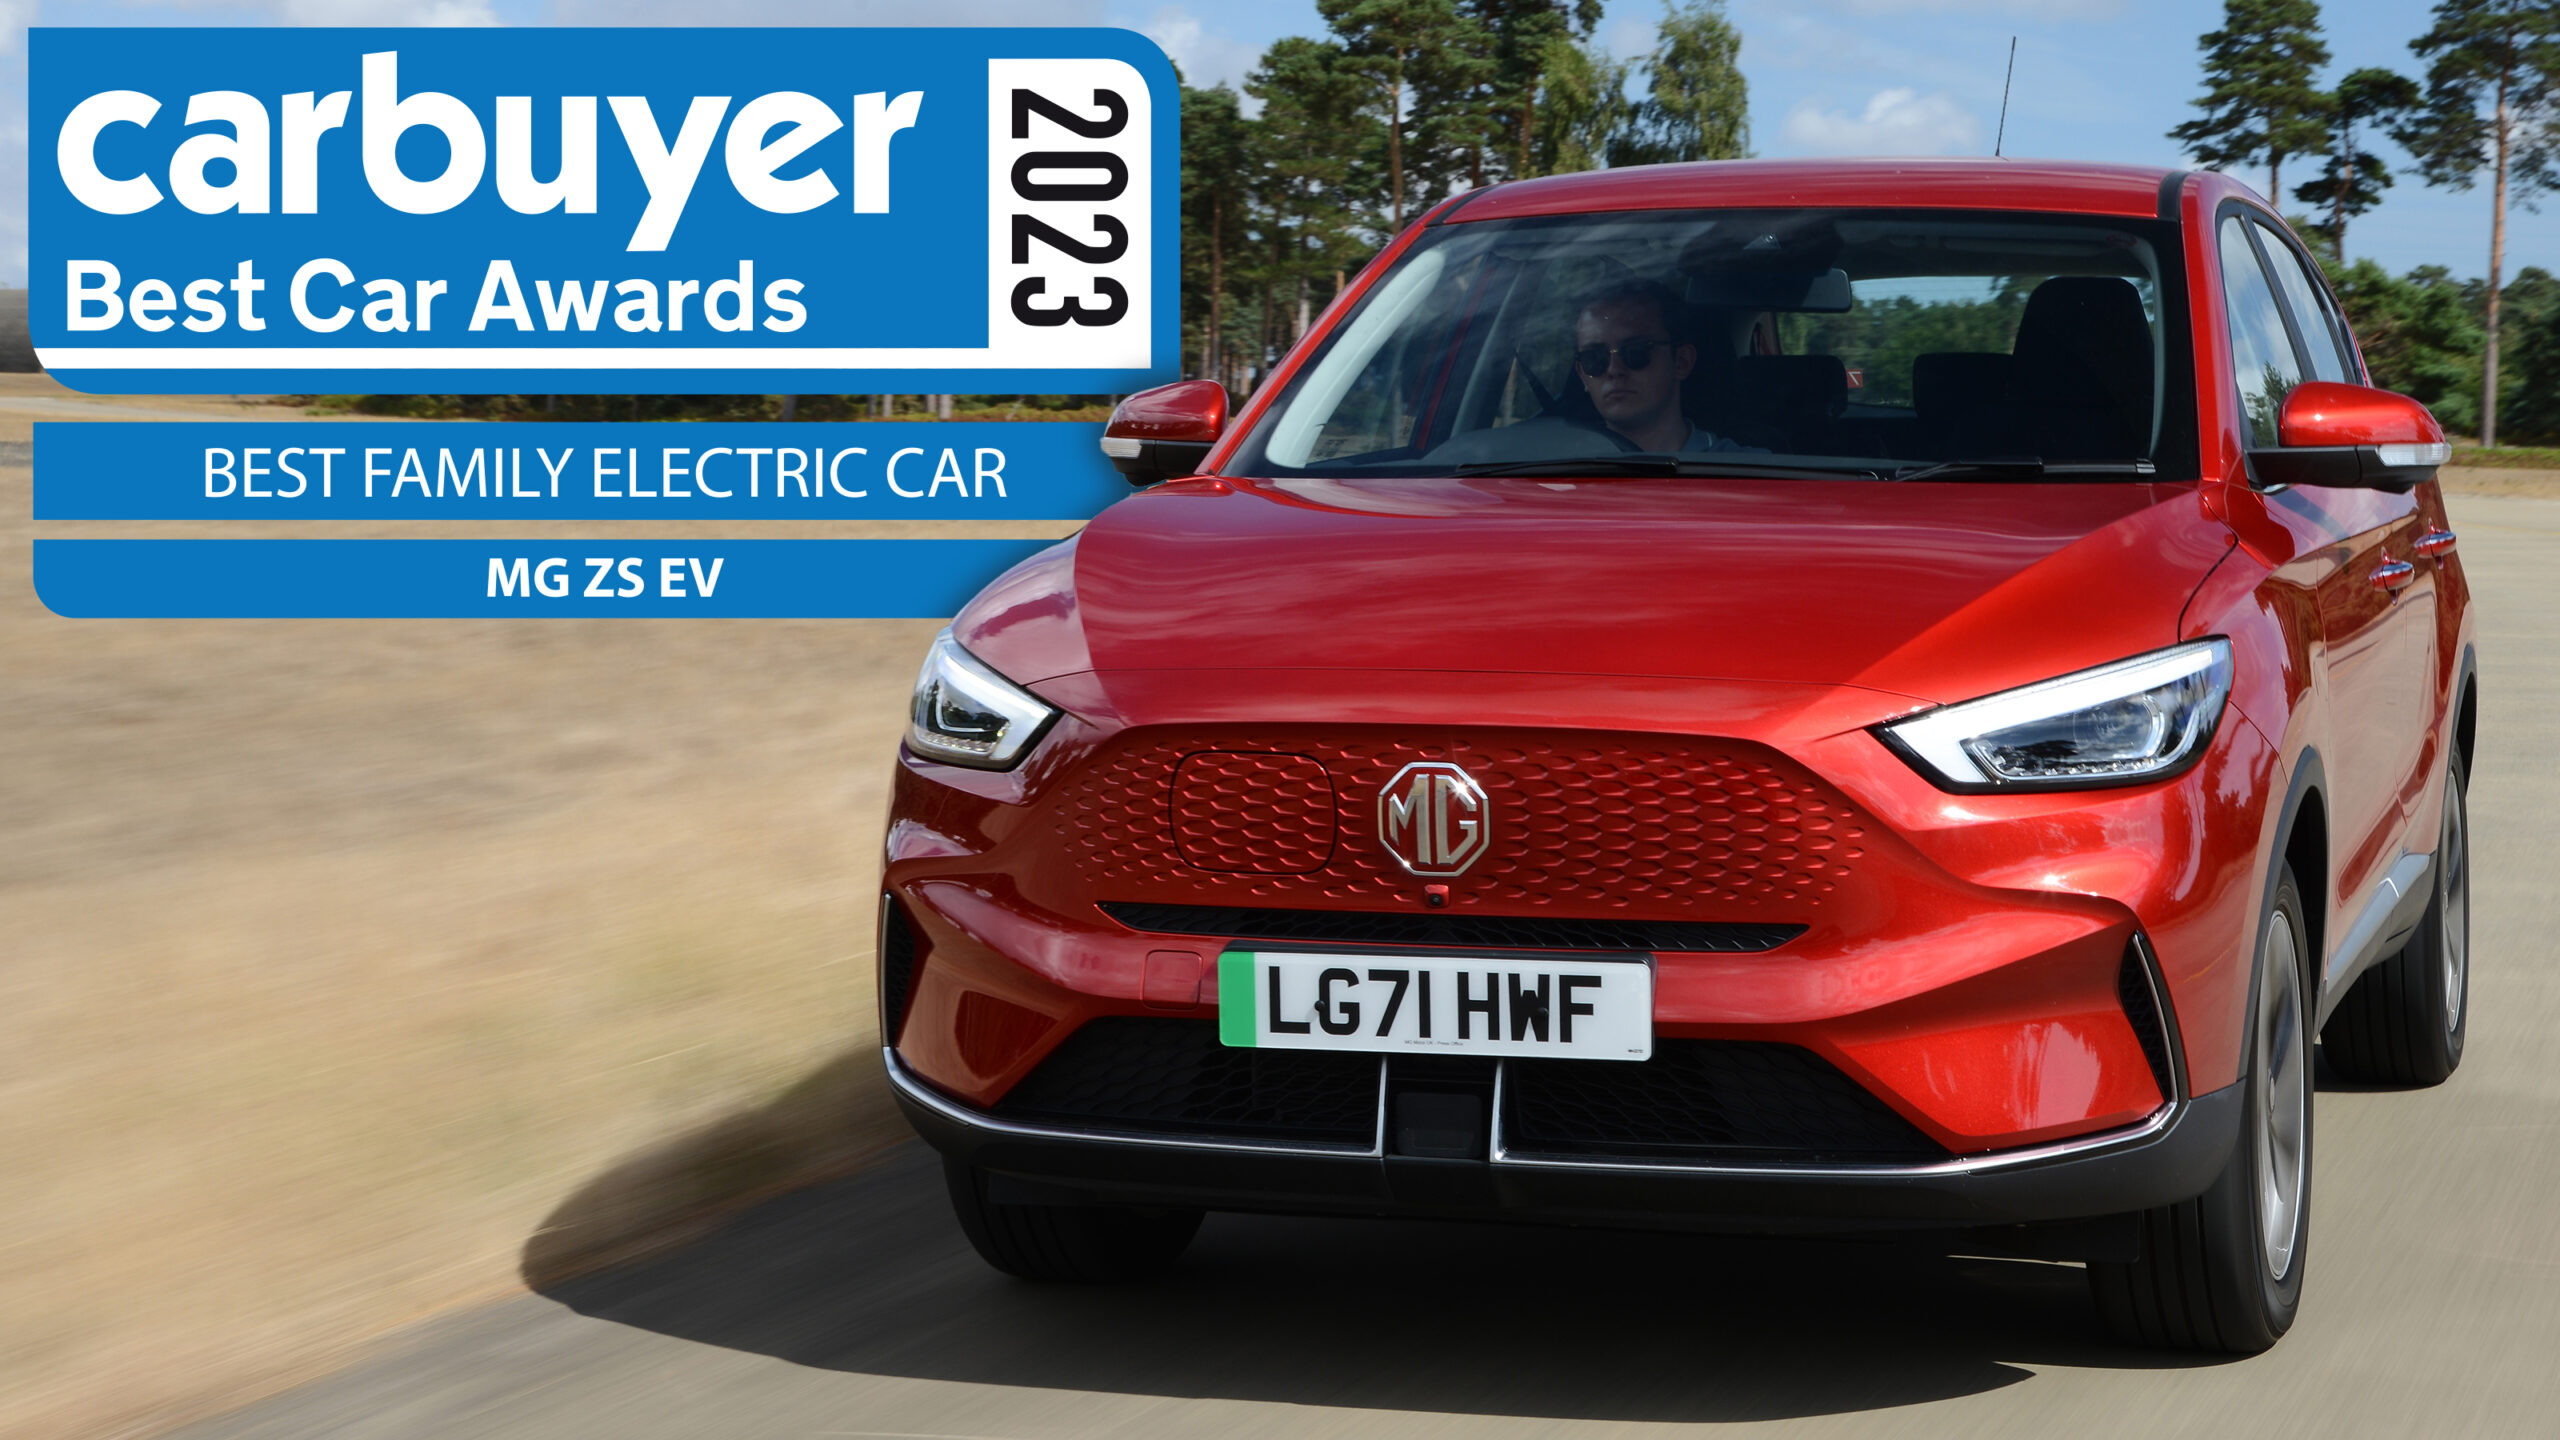 MG ZS EV named 'Best Family Electric Car' at 2023 Carbuyer Awards - MG Car  Club